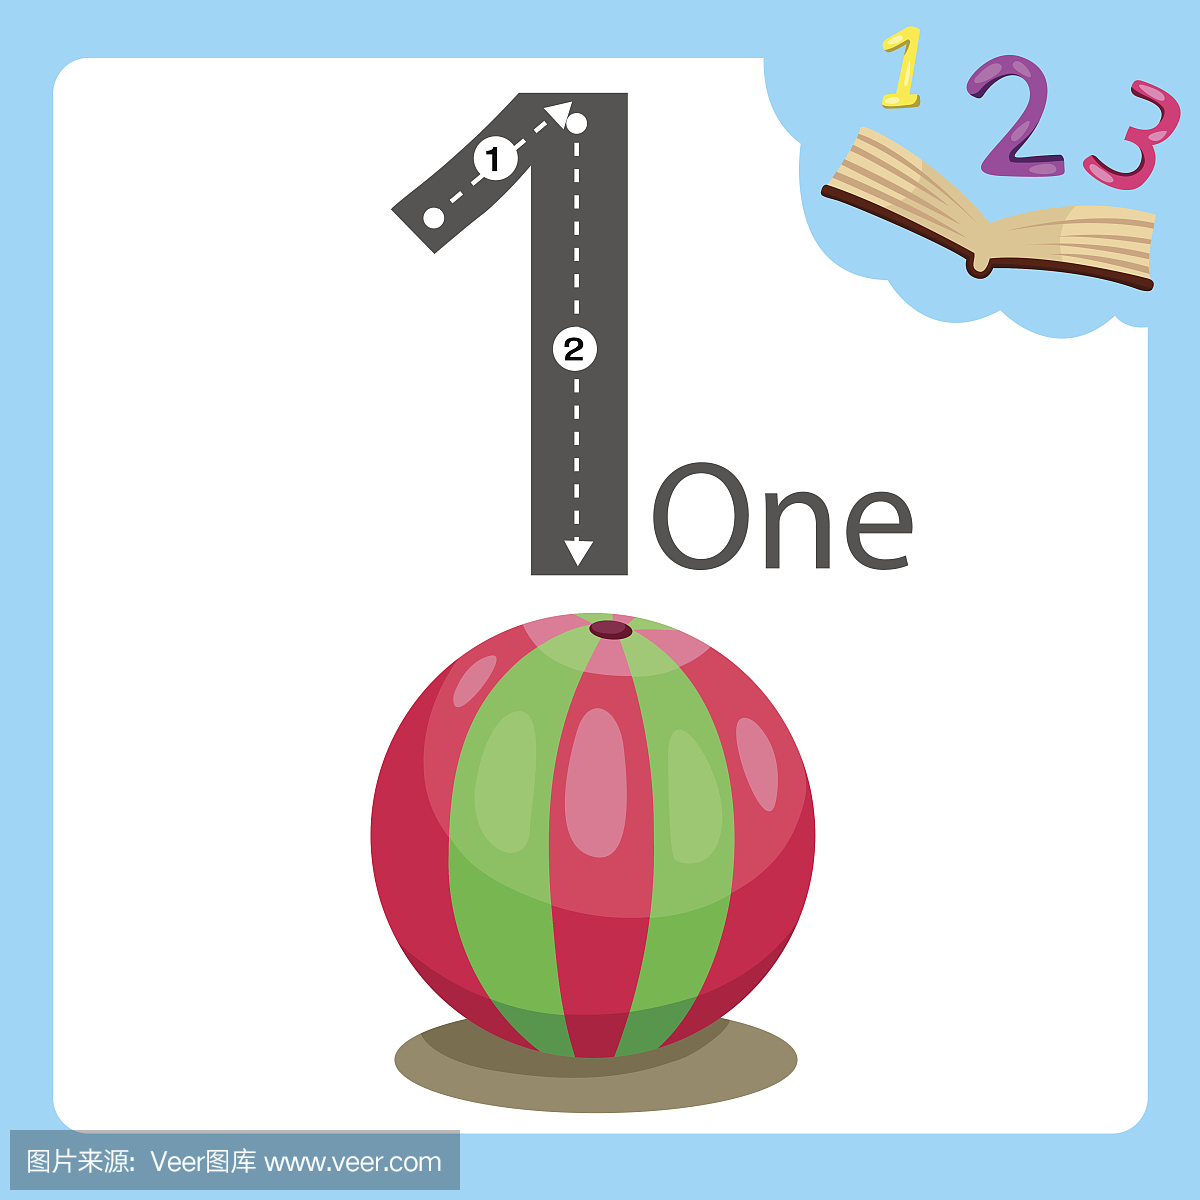 Illustrator of one number